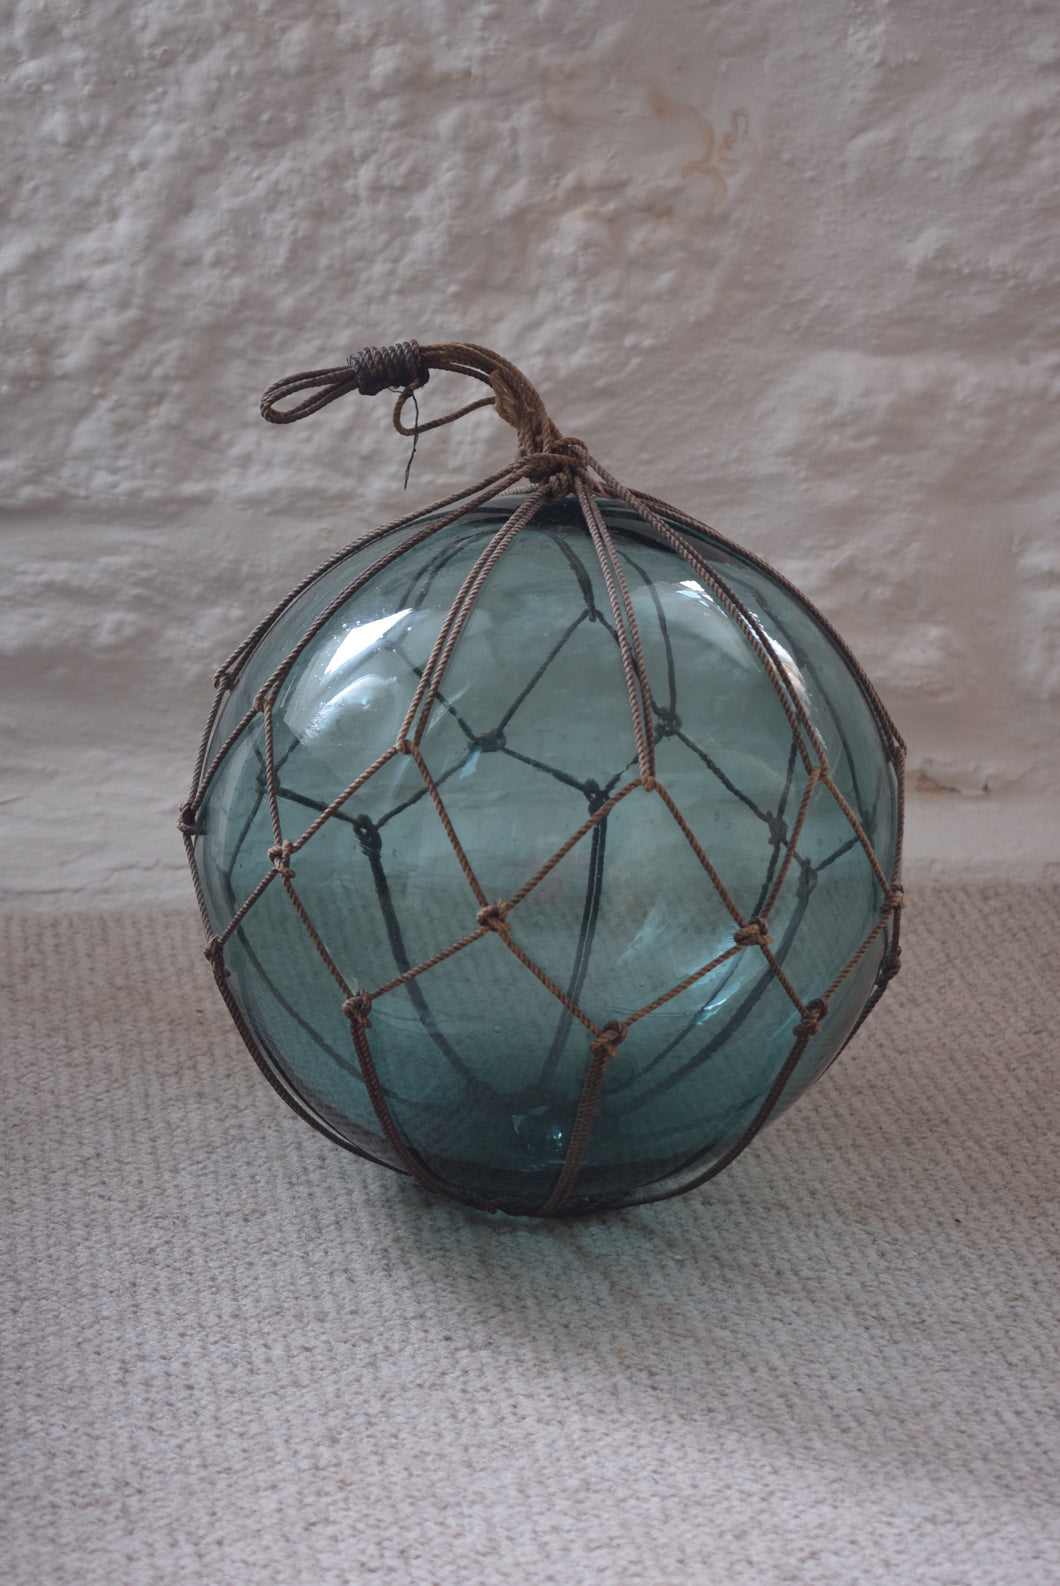 Vintage Japanese Glass Fishing Float With Netting